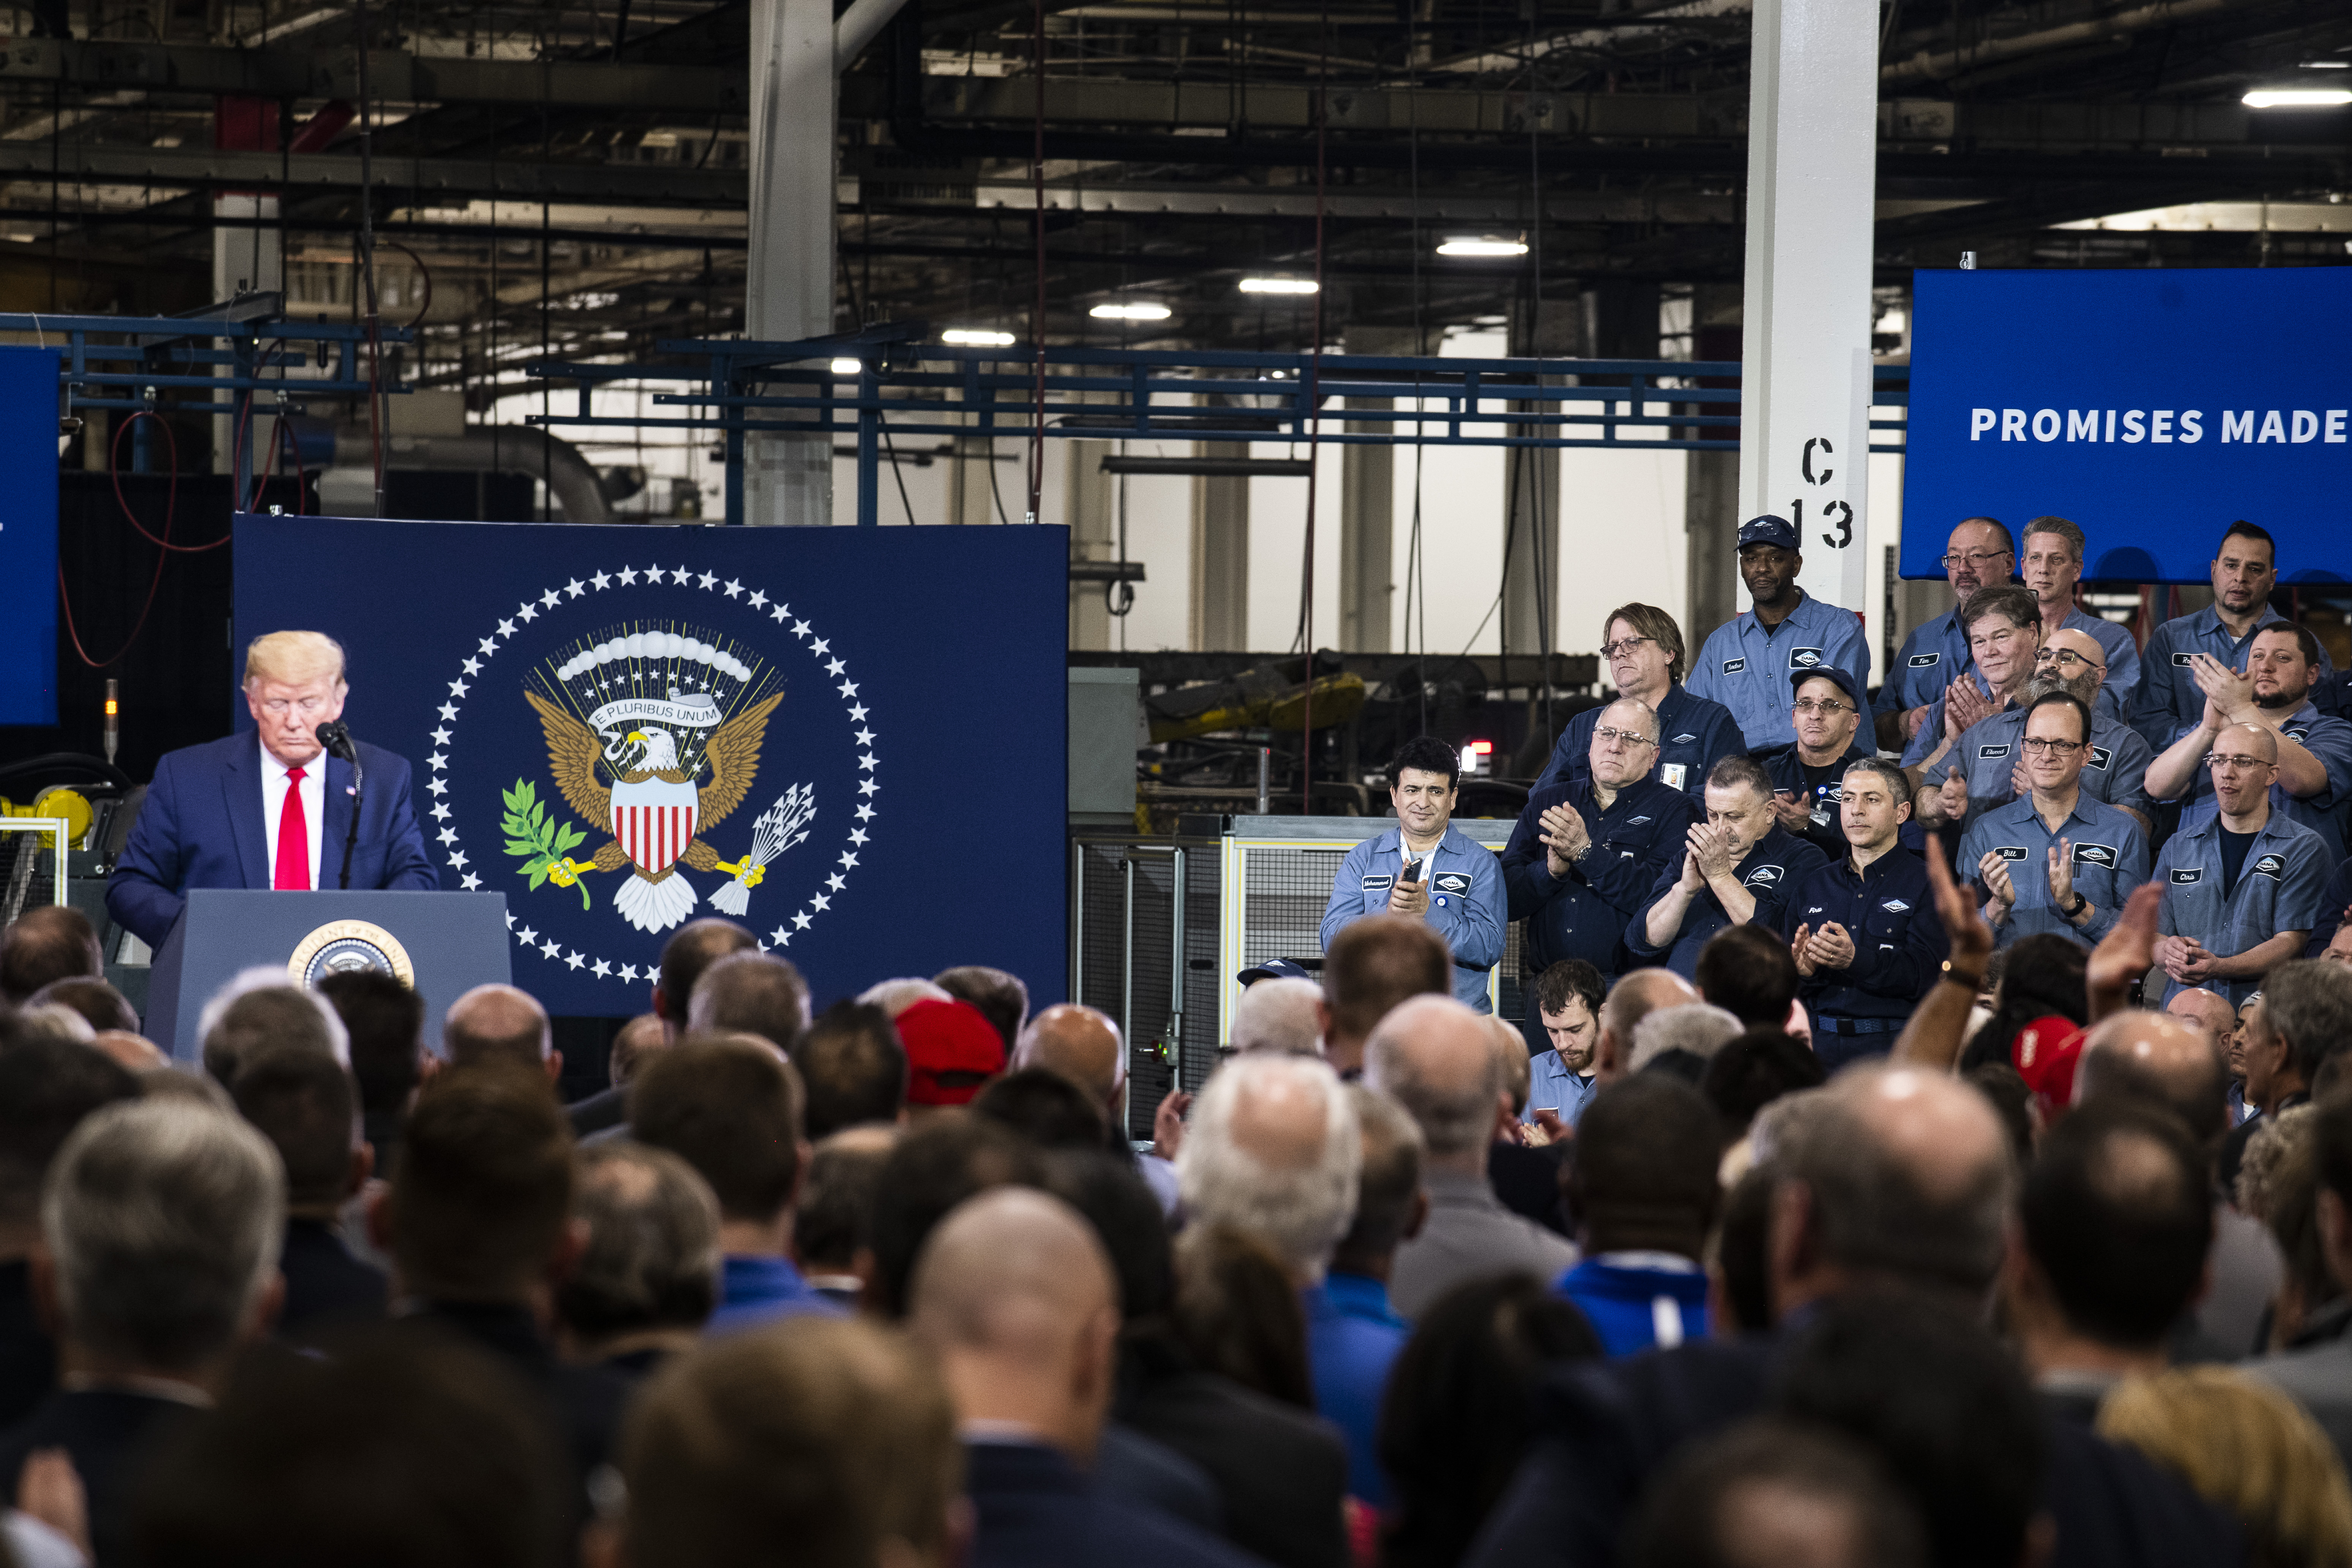 Employees look on as President Donald Trump speaks at Dana Incorporated, an auto-manufacturing supplier, on January 30, 2020 in Warren, Michigan.